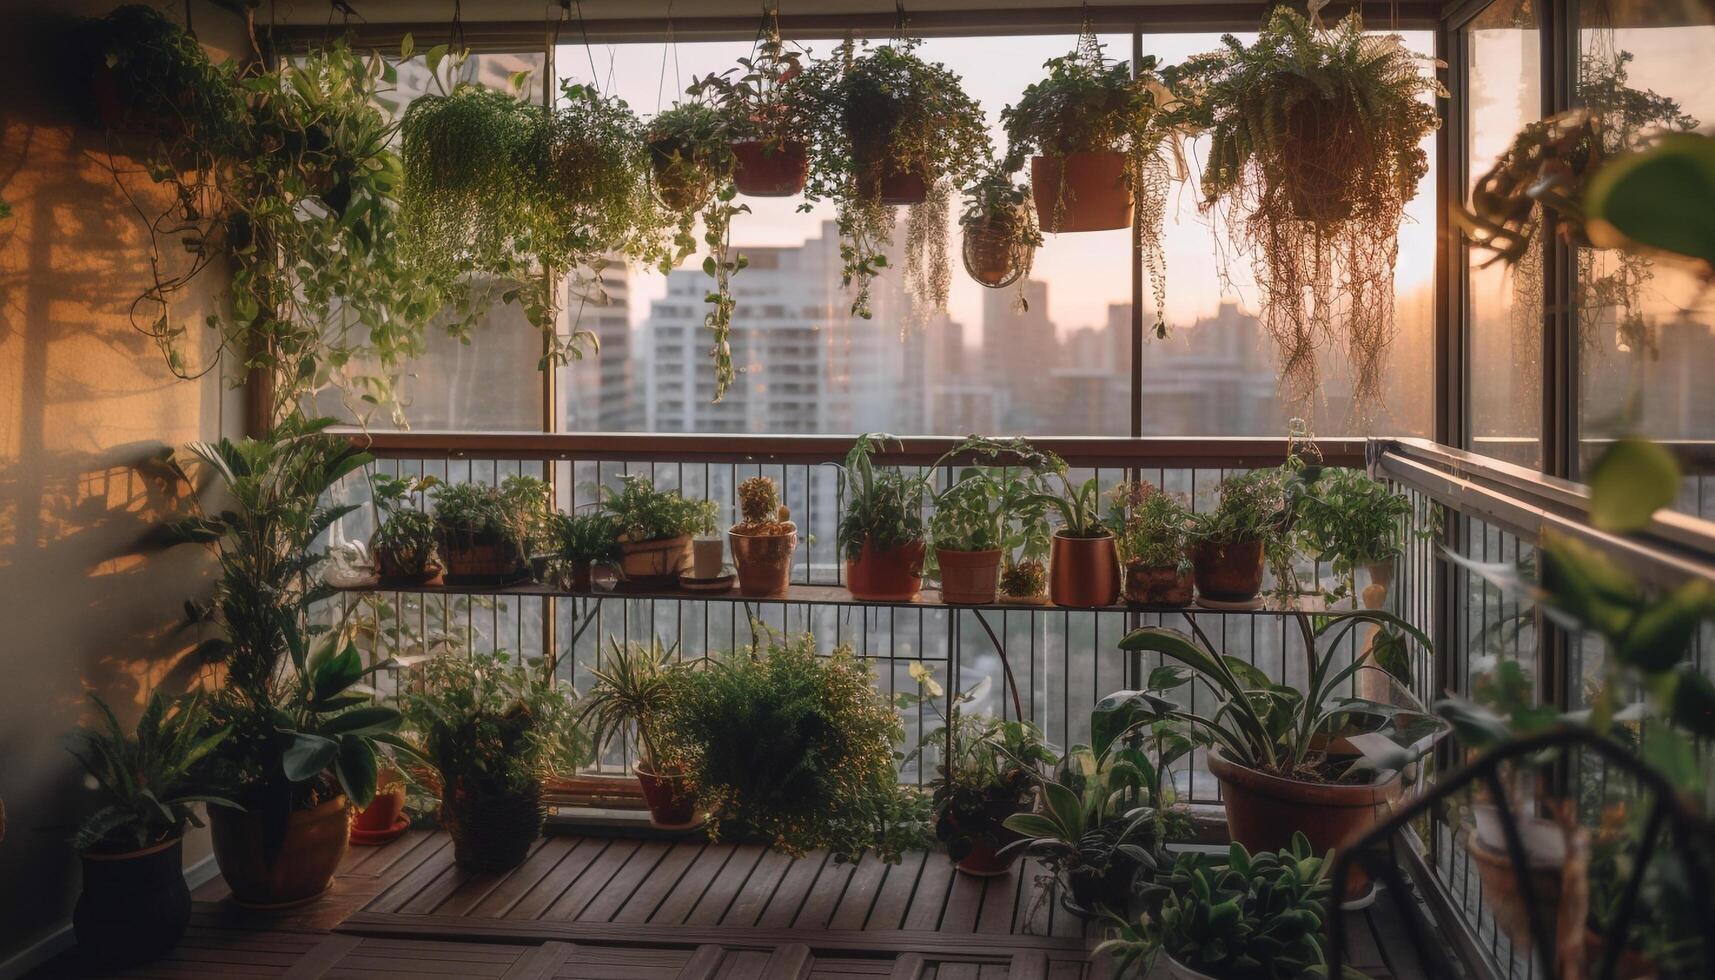 Modern design brings nature indoors with potted plants and greenery generated by AI photo